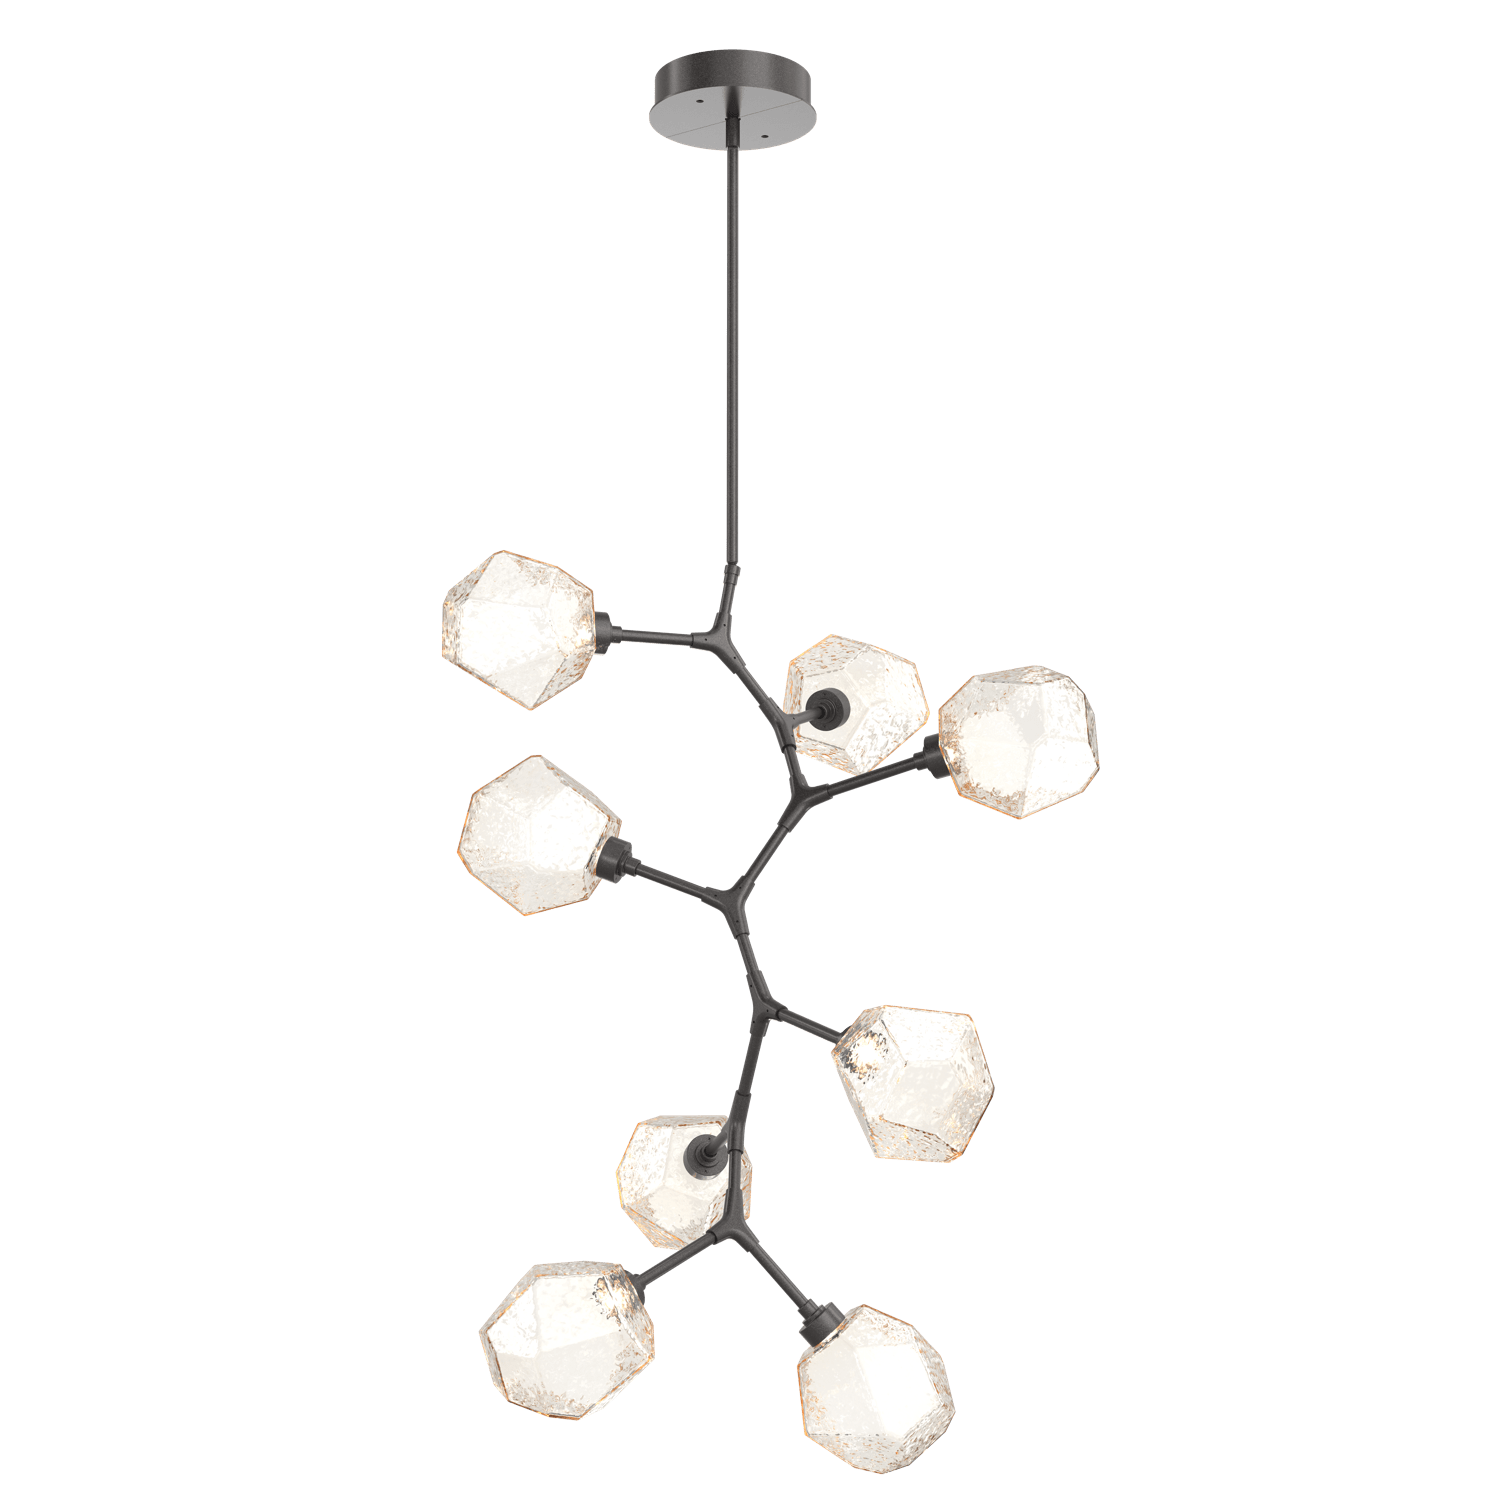 CHB0039-VB-GP-A-Hammerton-Studio-Gem-8-light-modern-vine-chandelier-with-graphite-finish-and-amber-blown-glass-shades-and-LED-lamping